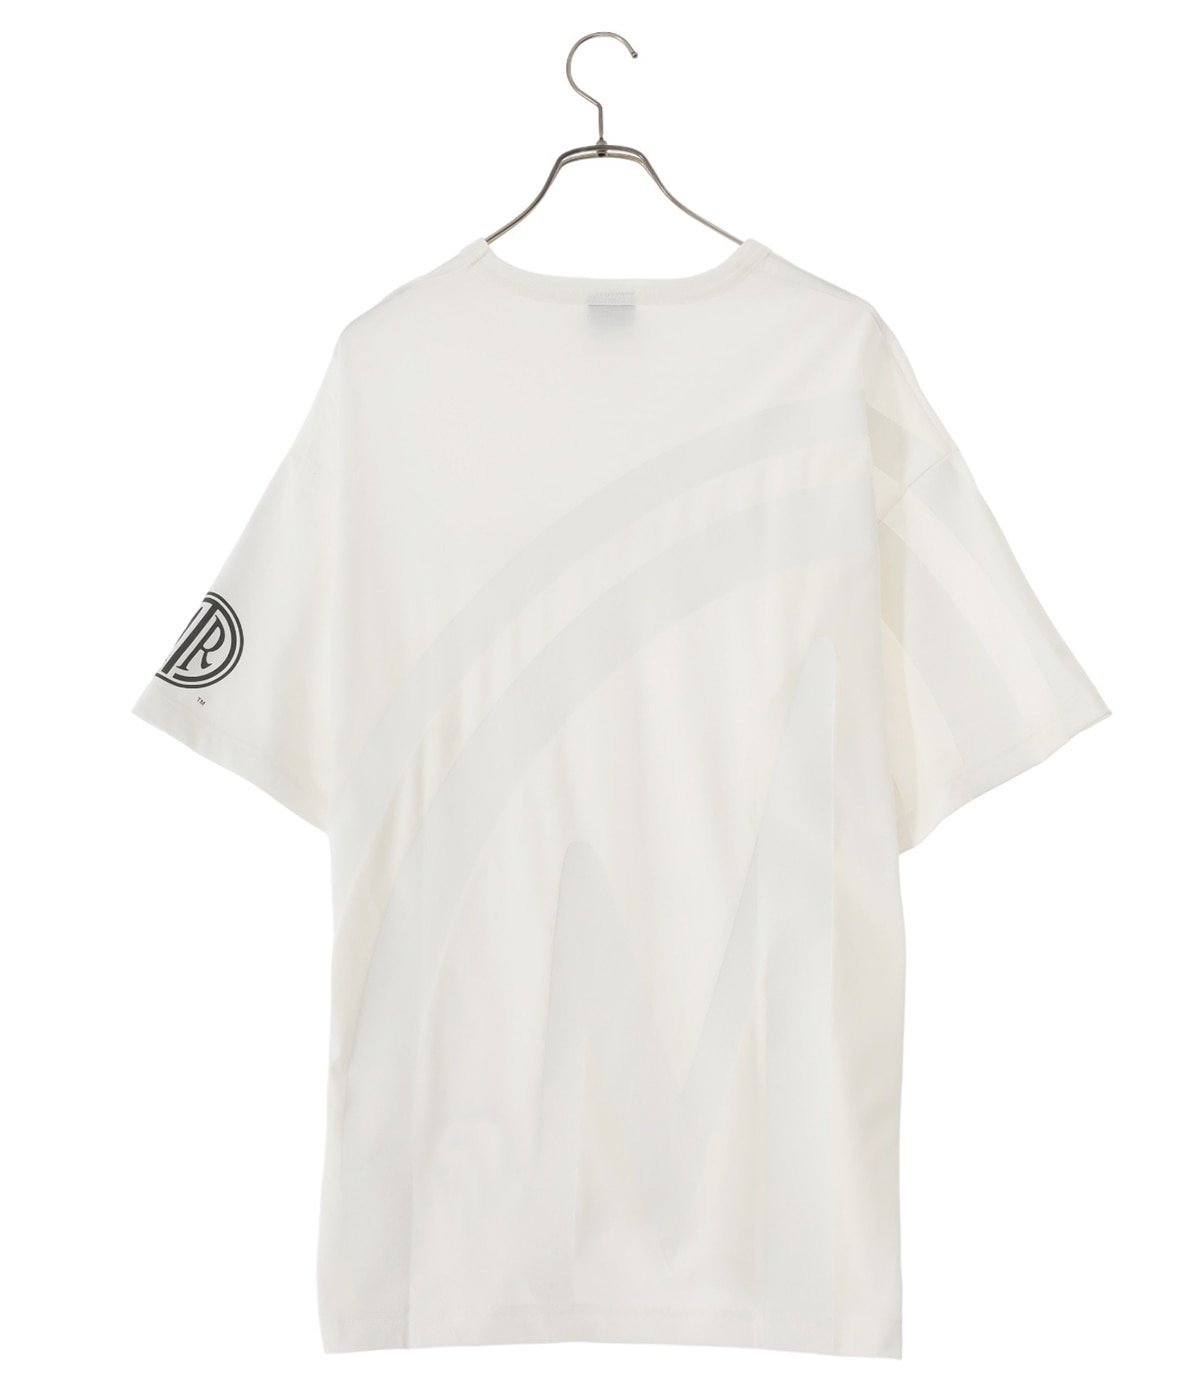 MOUT LARGE ICON T-SHIRTS | MOUT RECON TAILOR(マウトリーコン